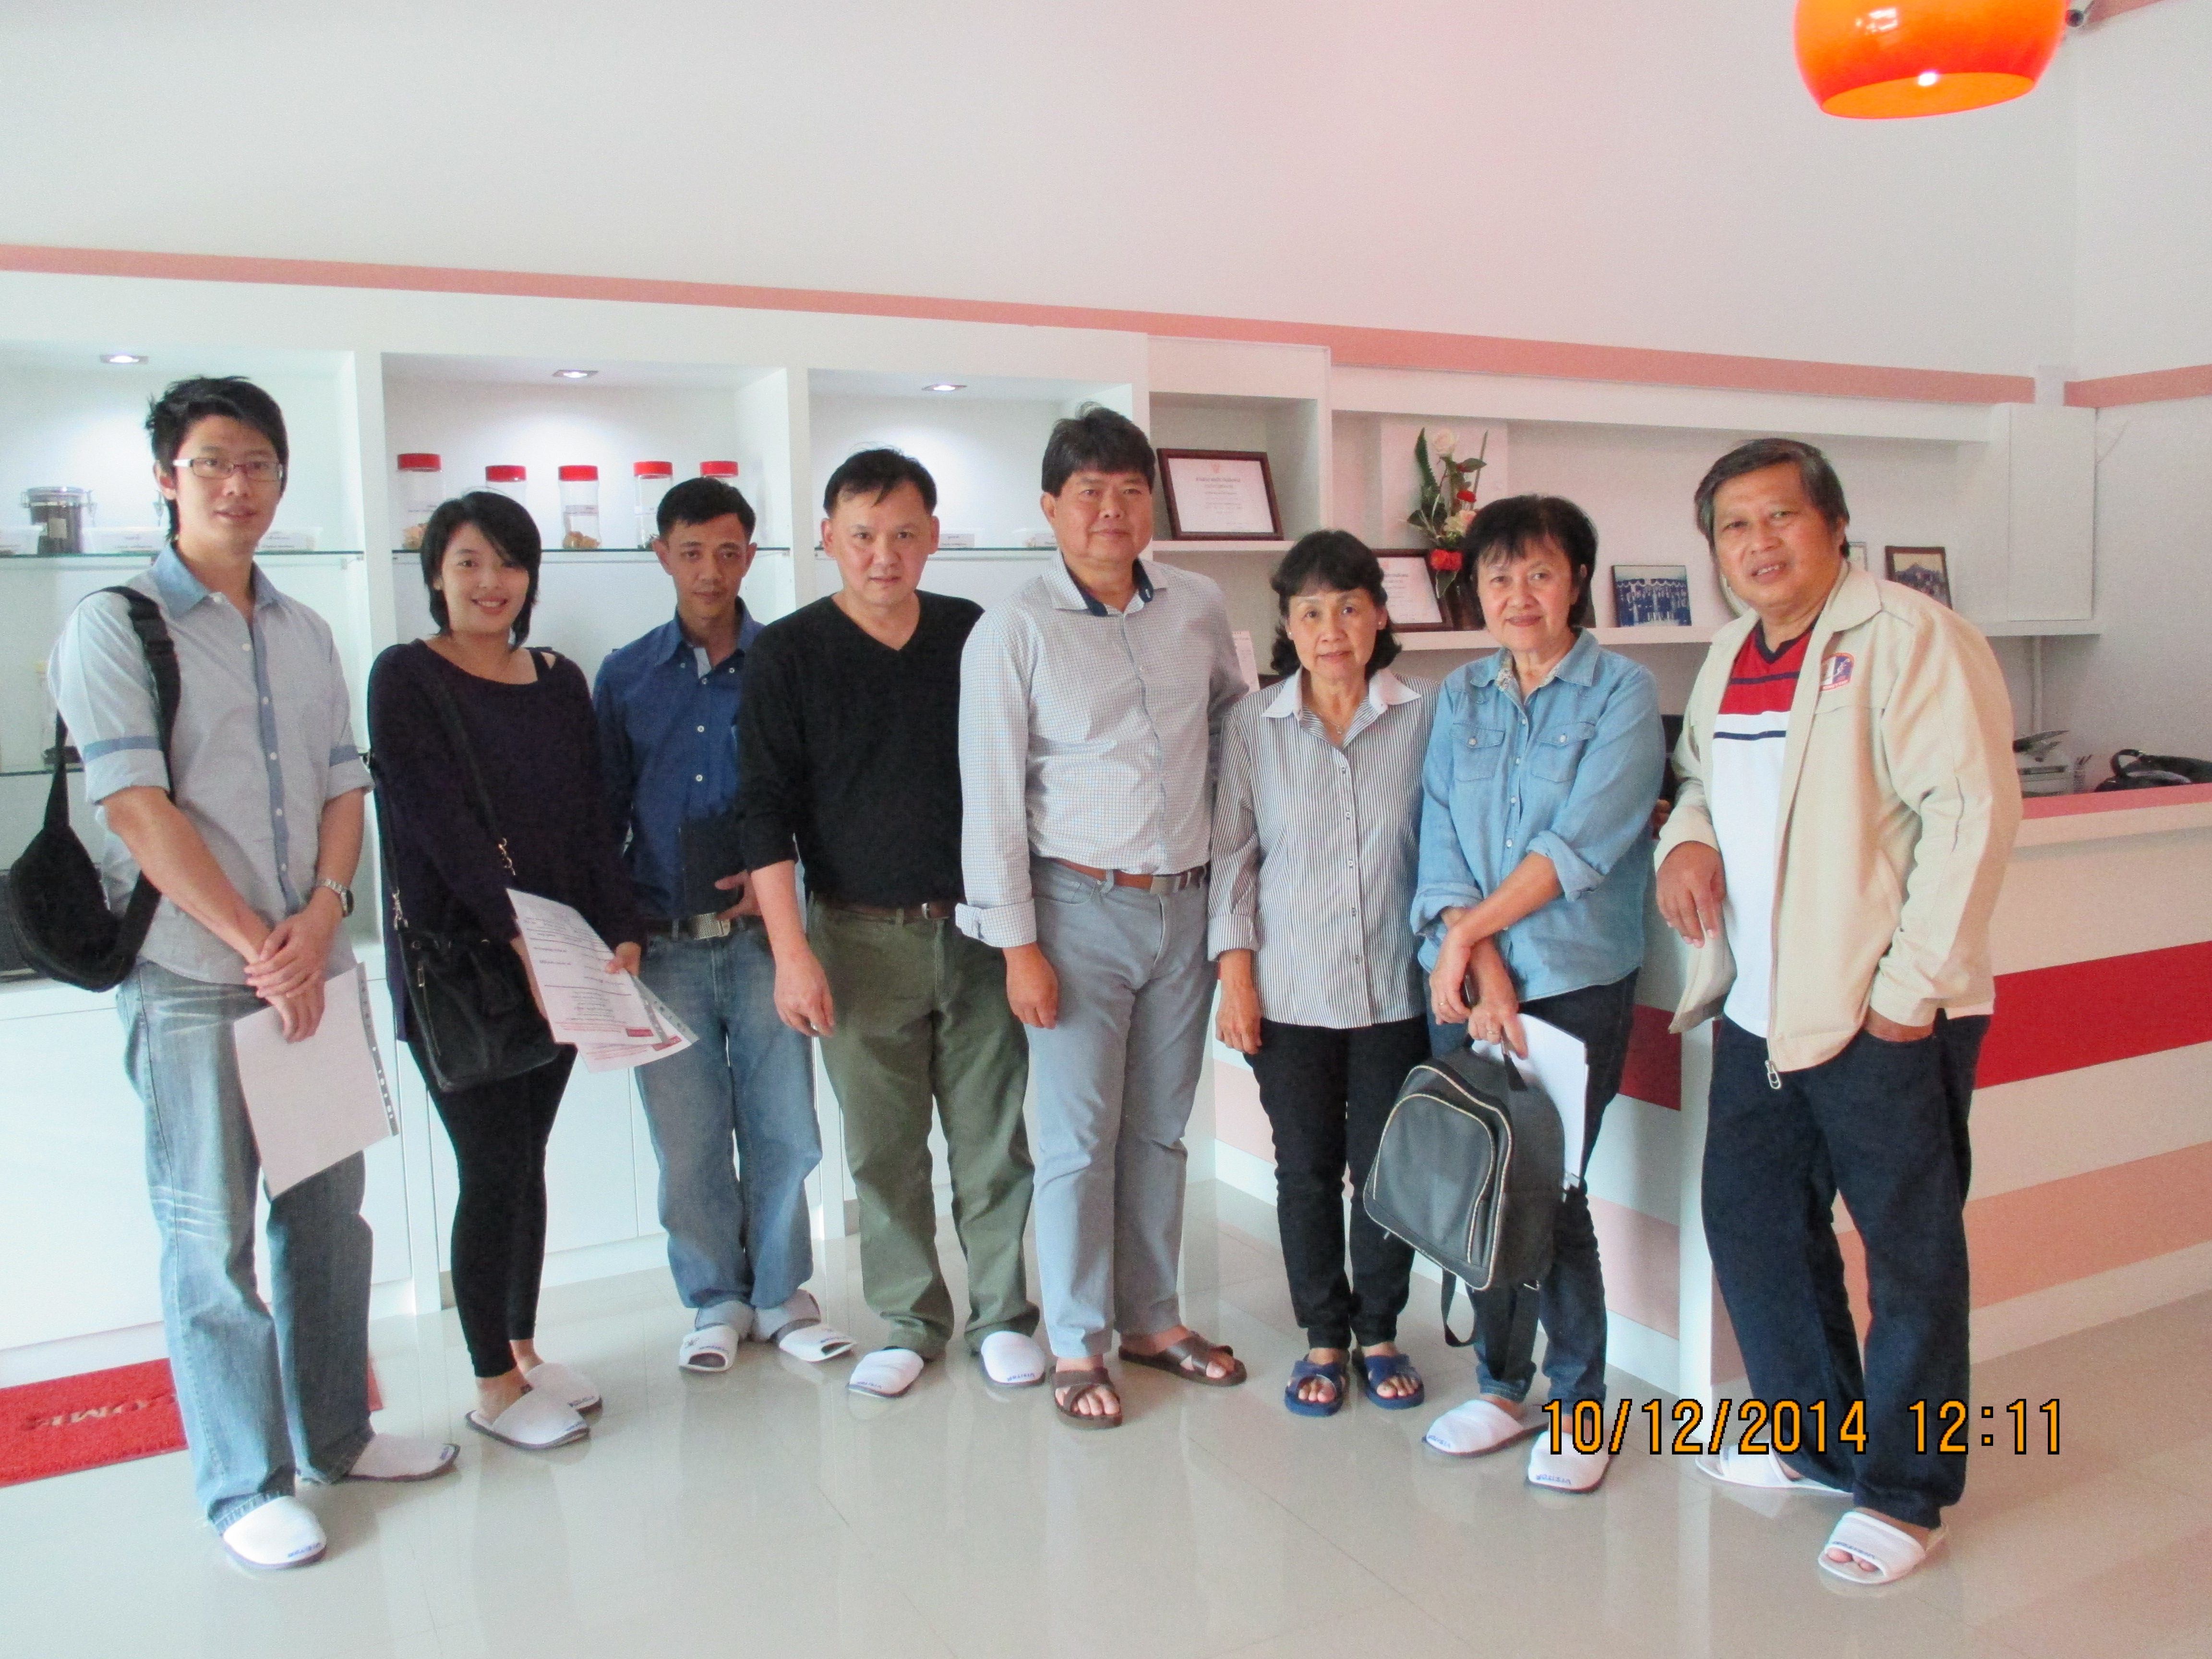 Dr. Somposh Wrttikornudomkit, Mr. Wiwat  Limkun and  Mrs. Prarinya Limkun together with their staffs of the 6 persons at Manose Health and Beauty Research Center in Chiang Mai, Thailand.